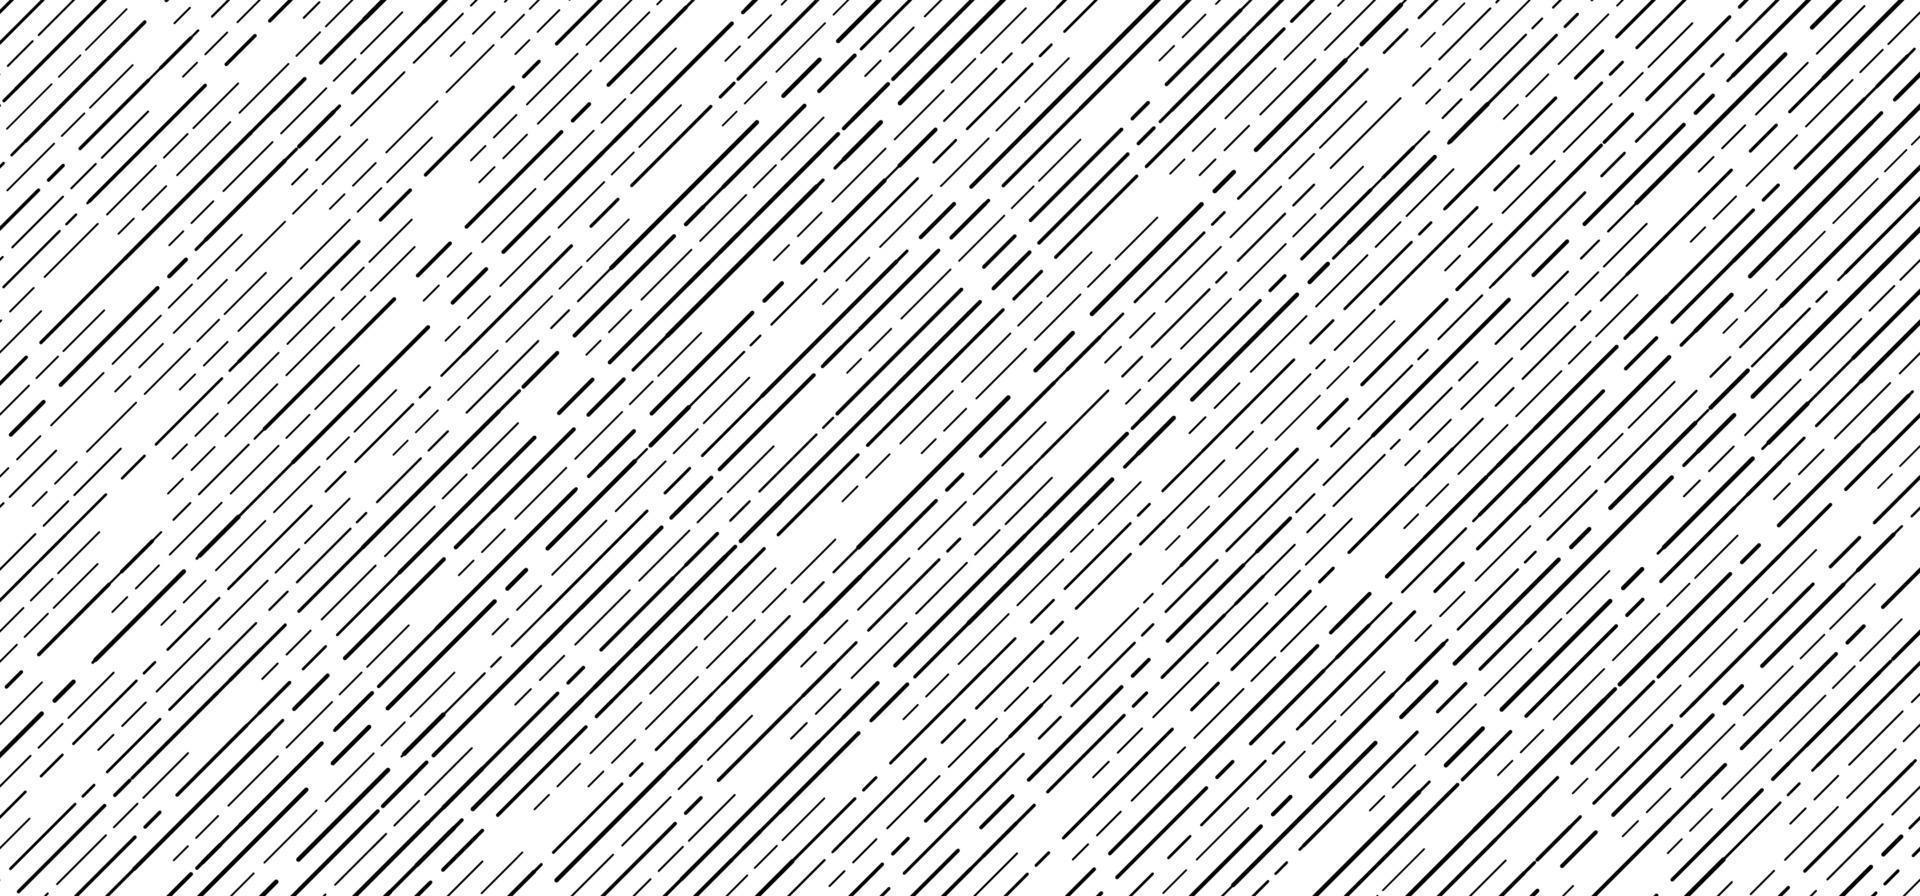 Abstract seamless black dash lines diagonal pattern on white background vector